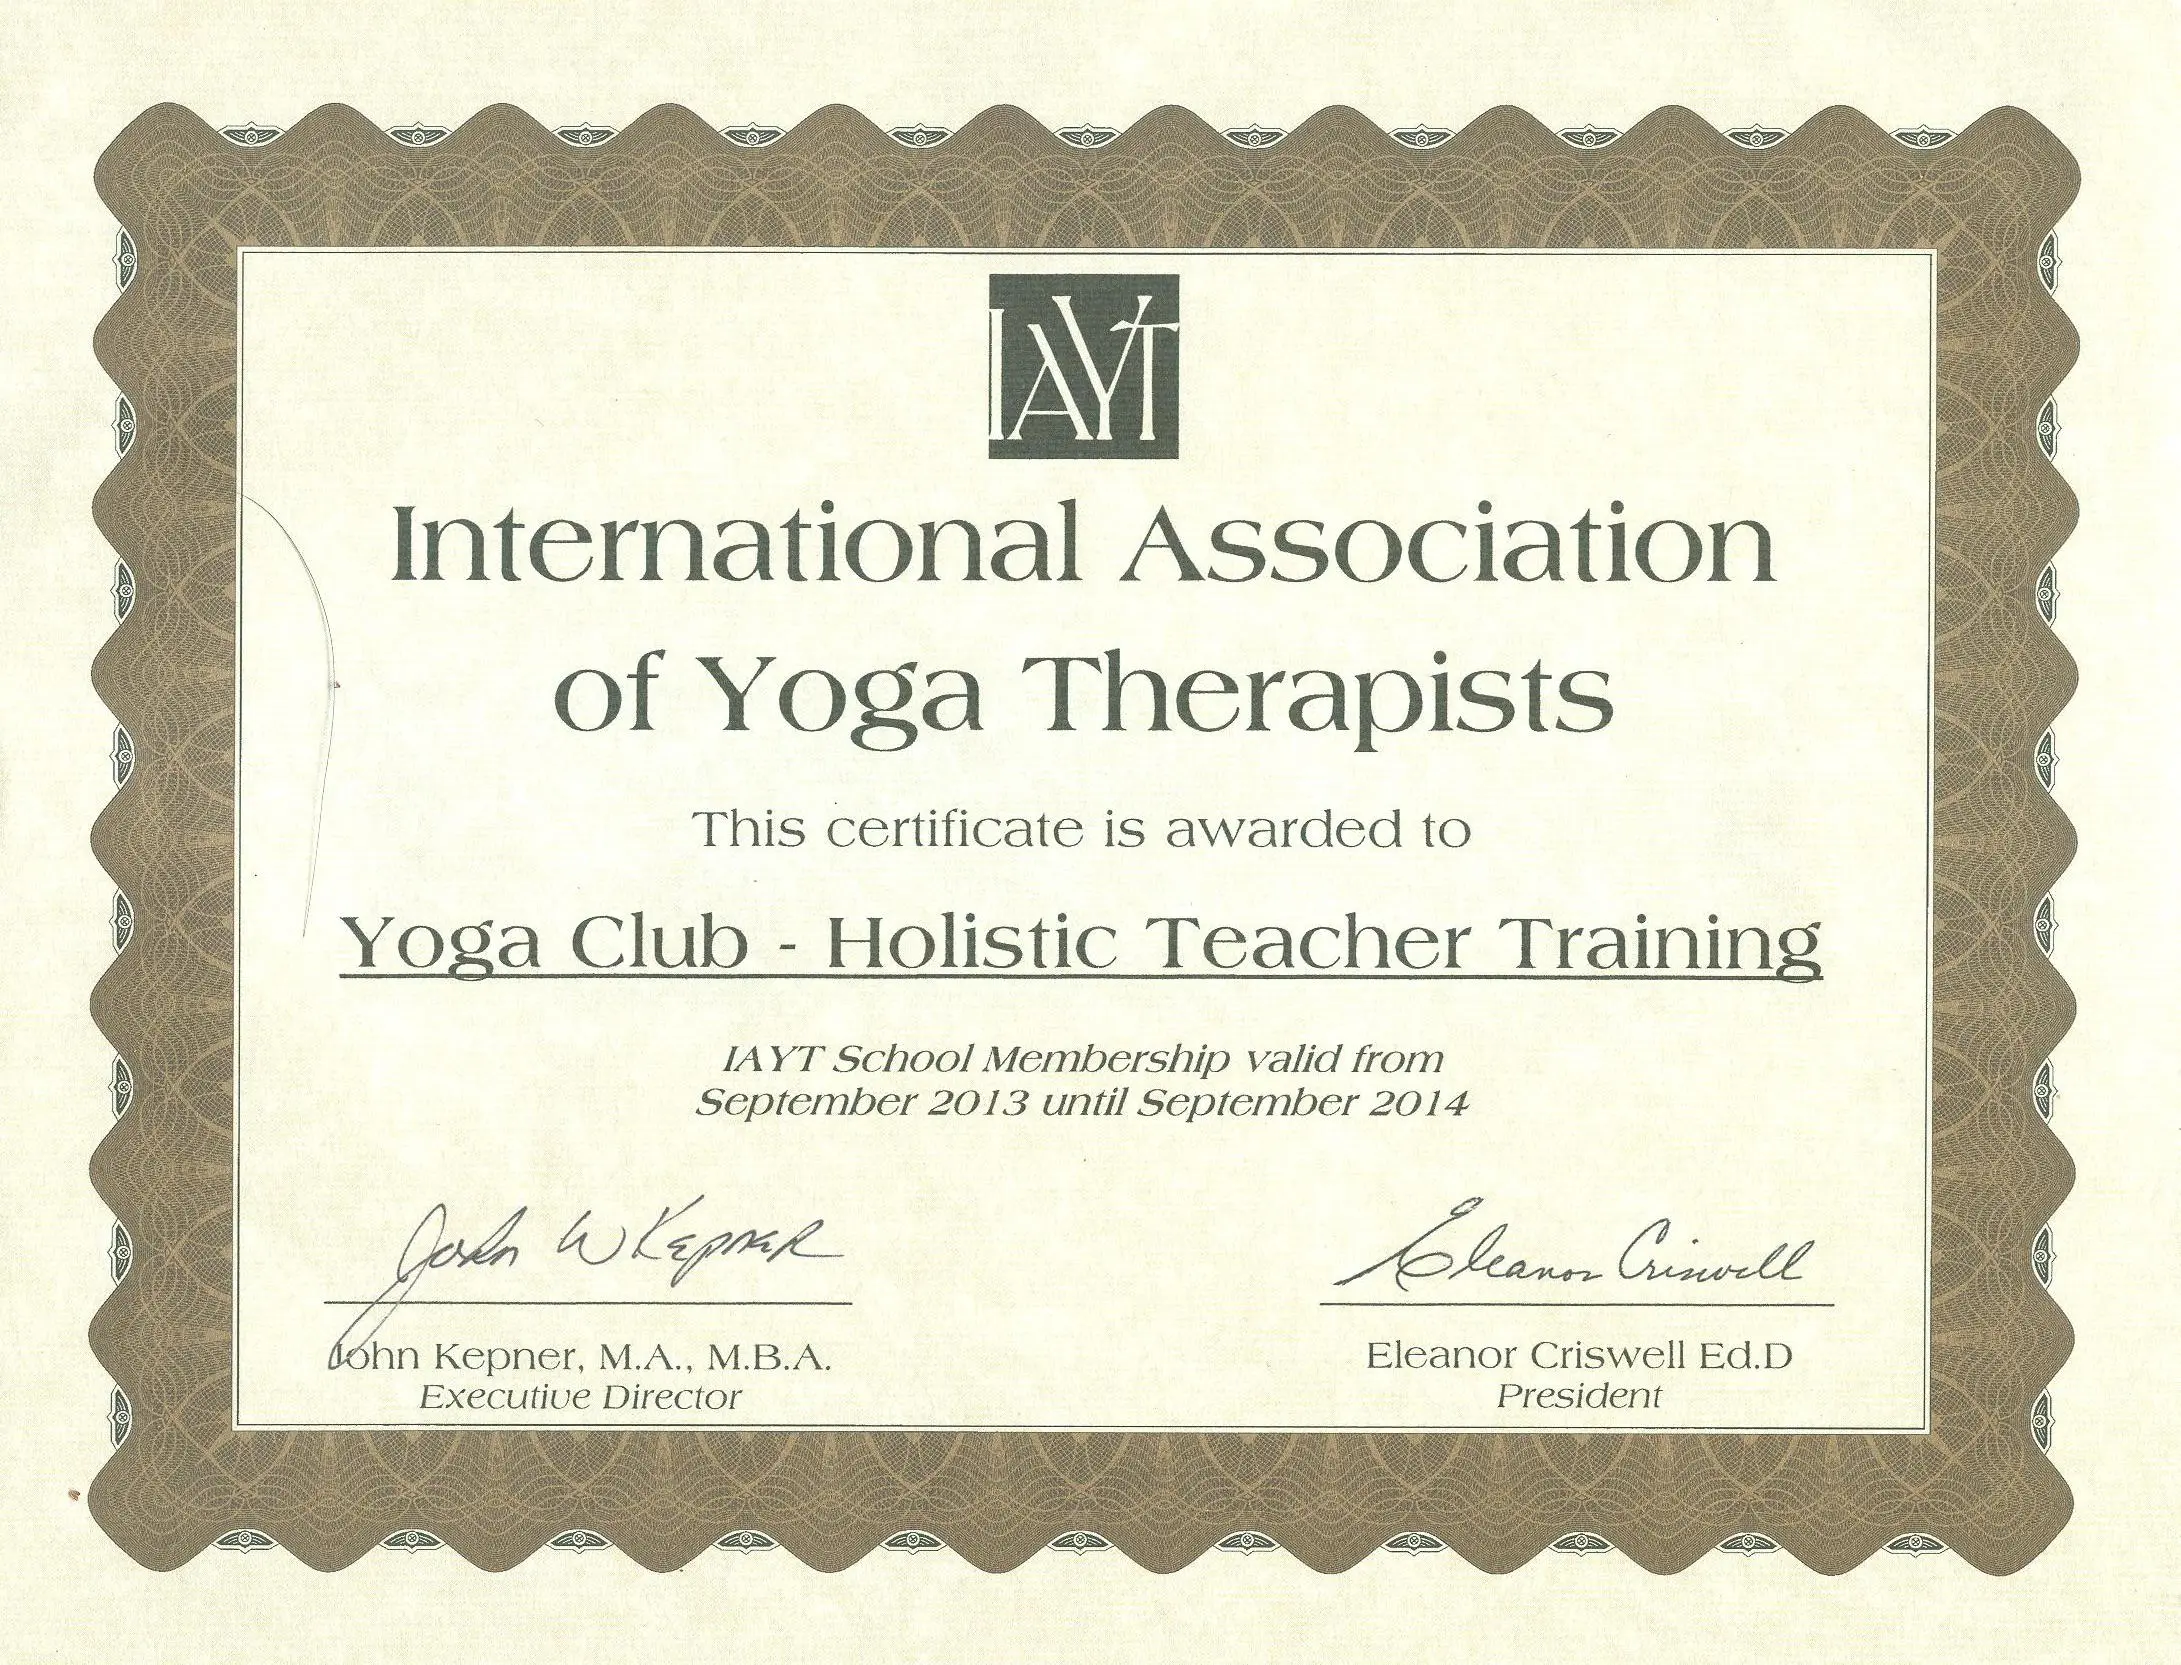 yoga therapy certification - What is the difference between a yoga therapist and a yoga instructor